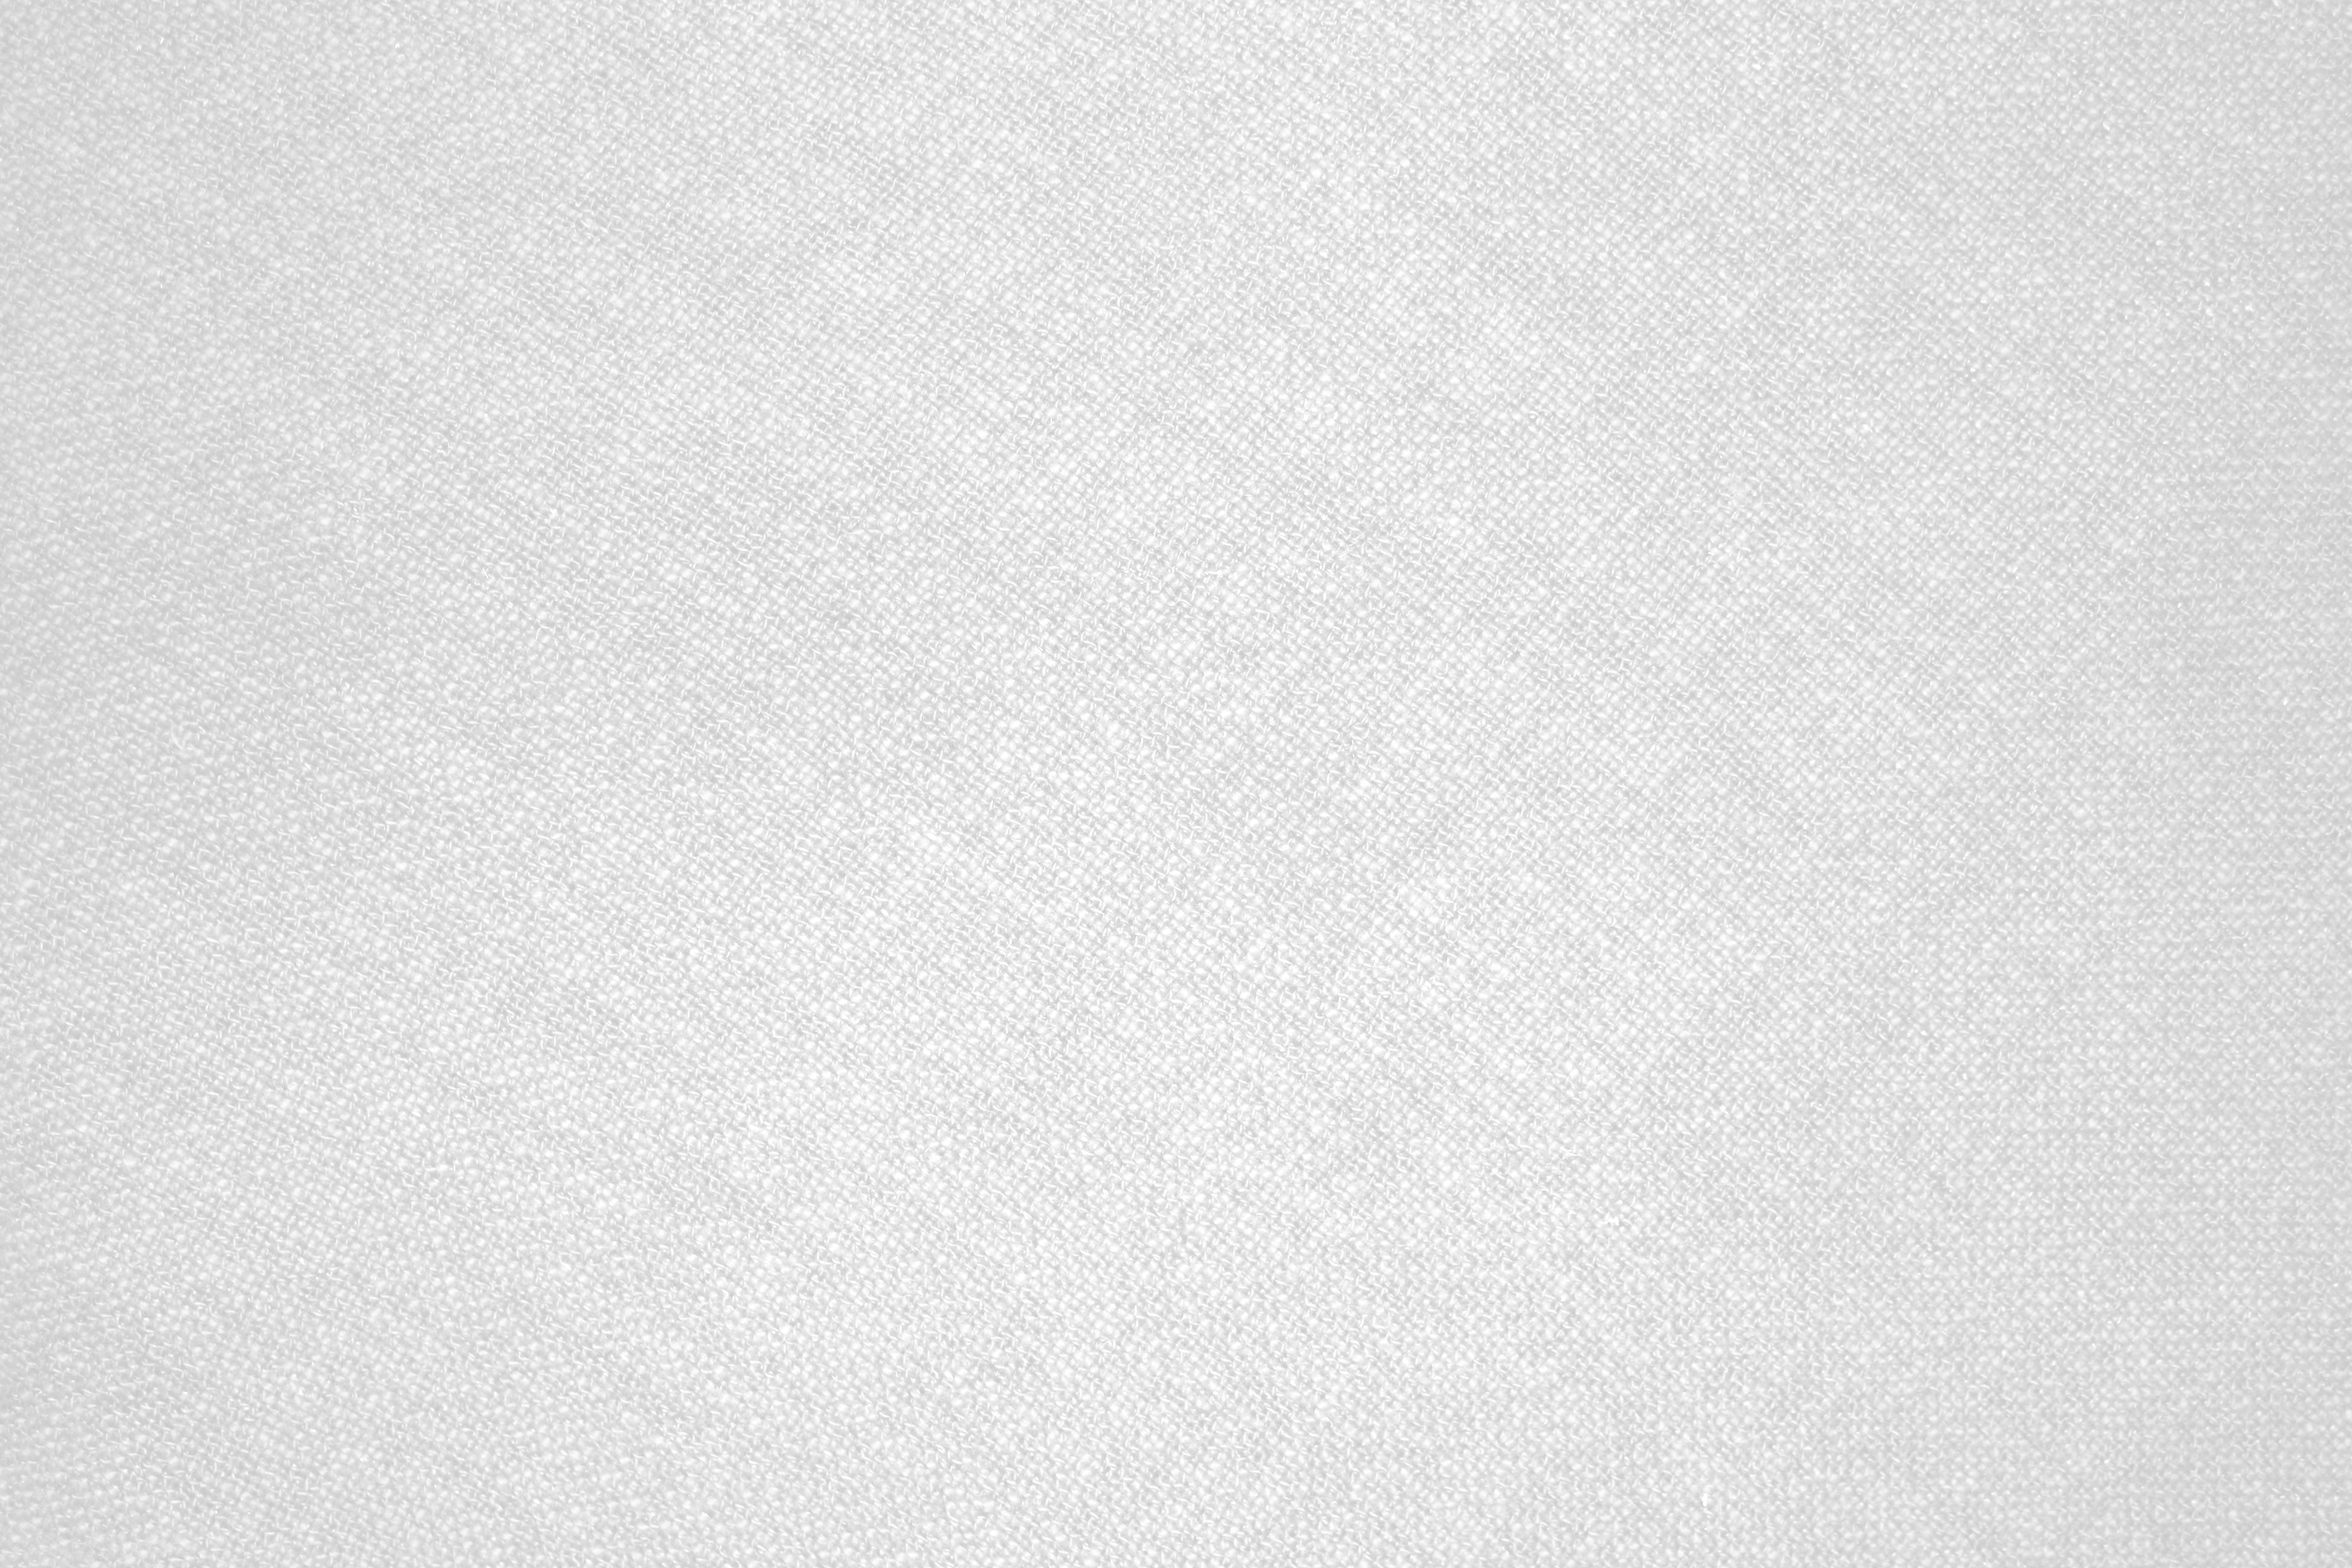 White Fabric Texture   Free High Resolution Photo   Dimensions 3888